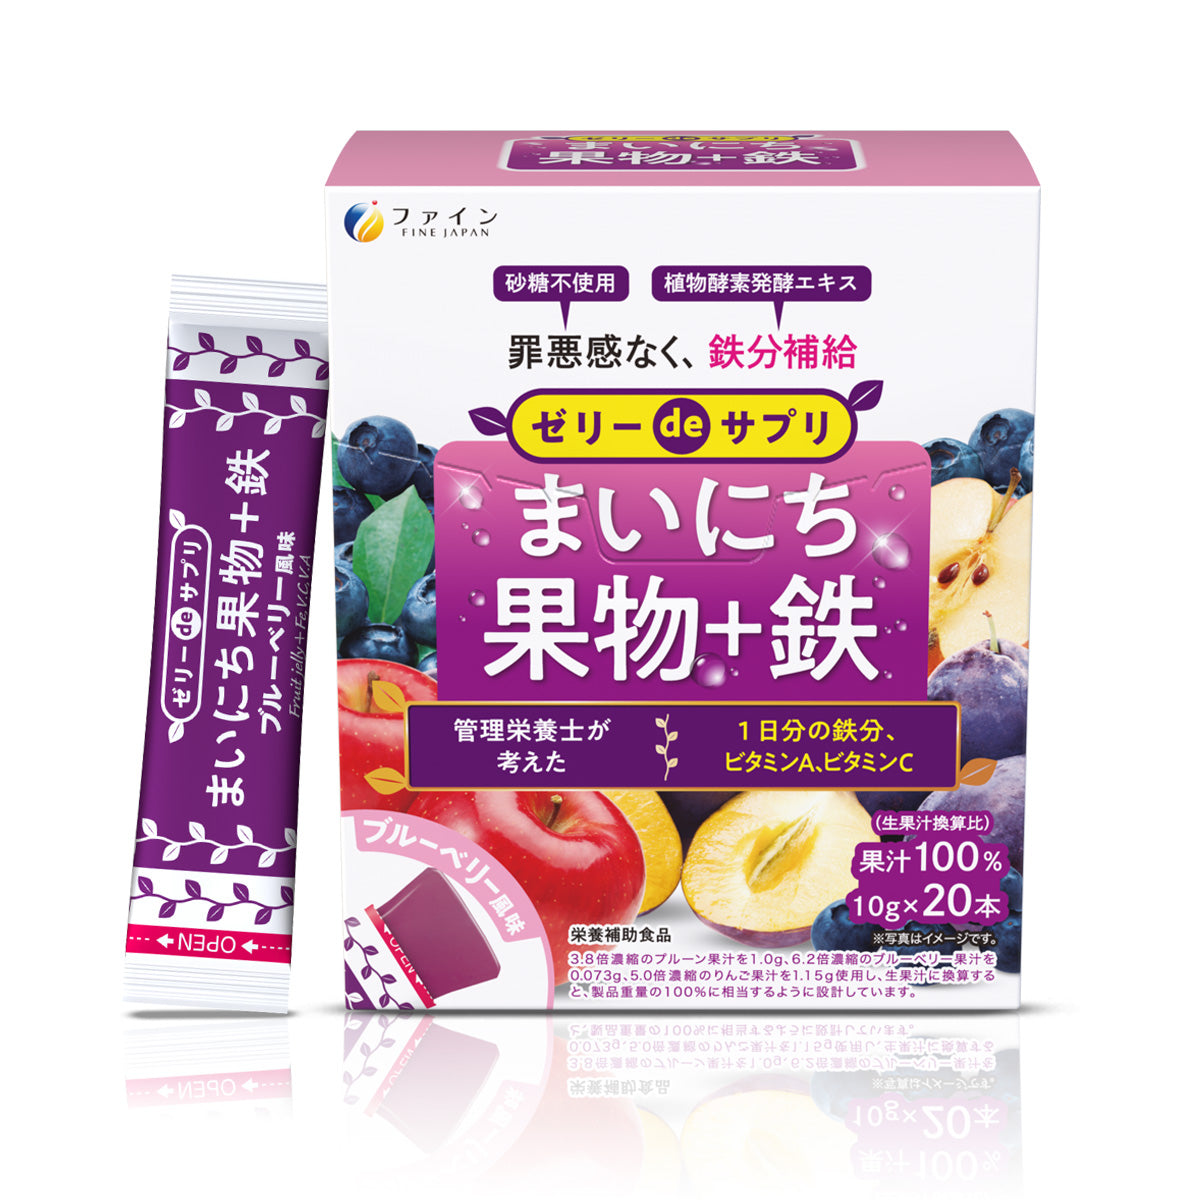 Everyday Fruit Jelly and Iron Supplement (20 Sticks) by FINE JAPAN